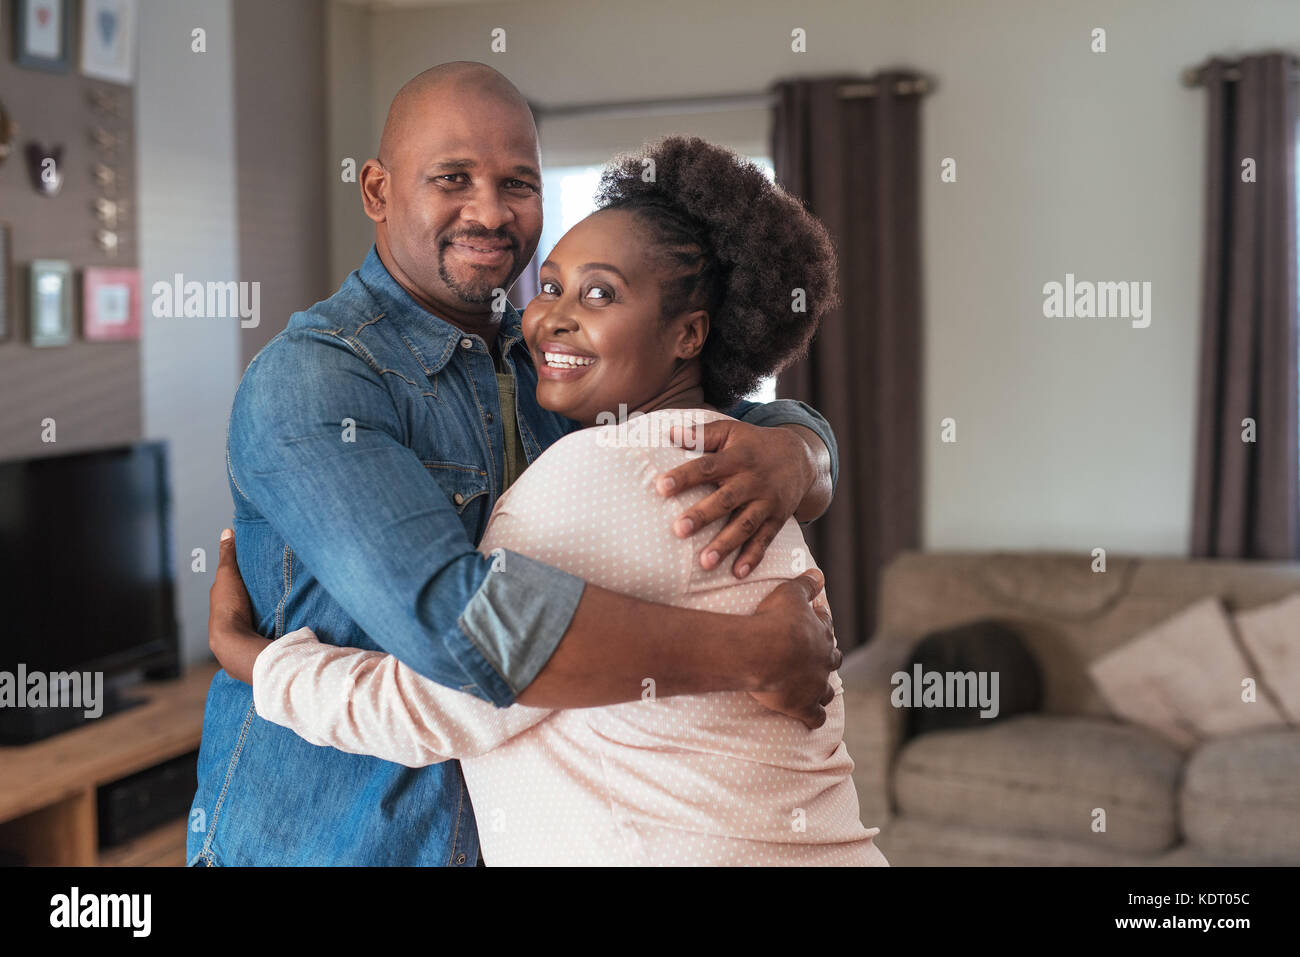 Affectionate African couple smiling and hugging each other at home Stock Photo